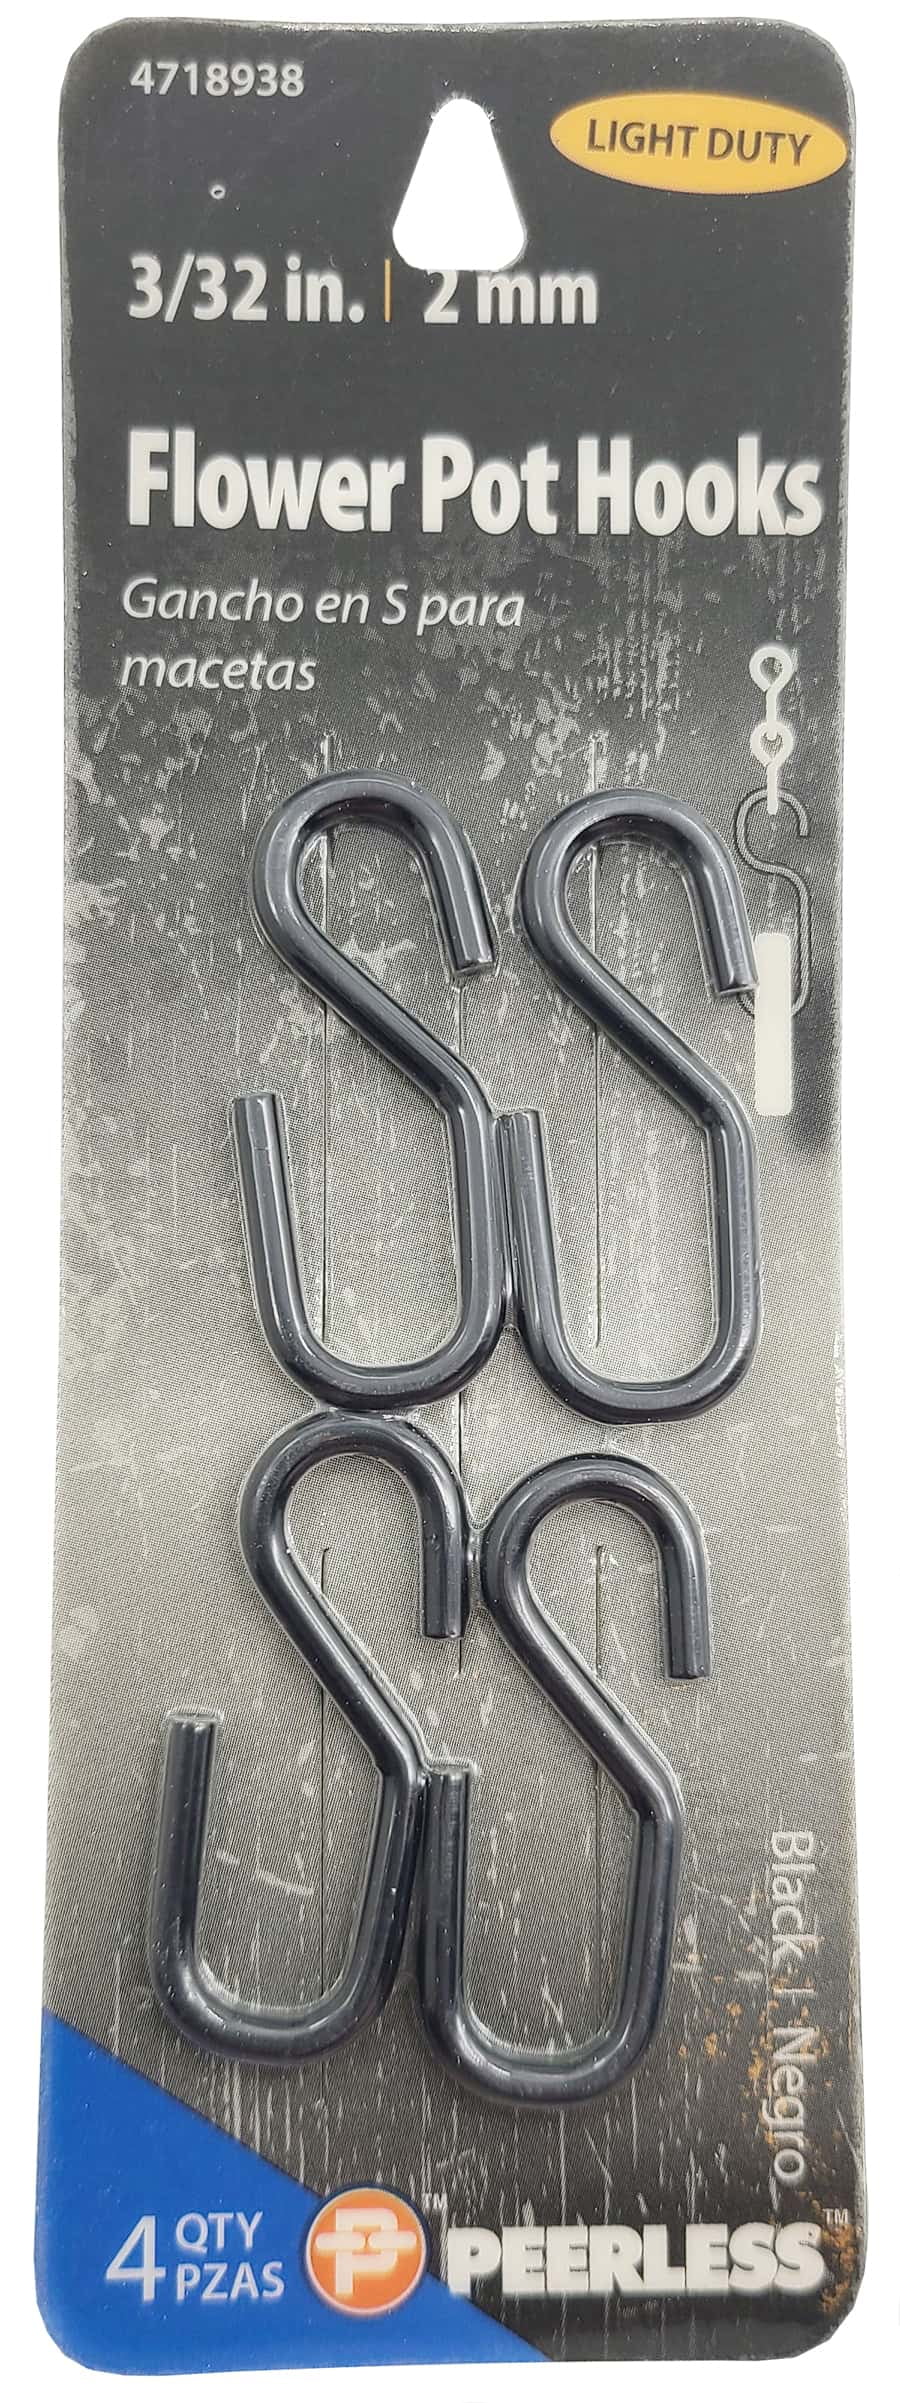 S chain hook lot of 10 pot hanging 1/4" x 2 1/2" 